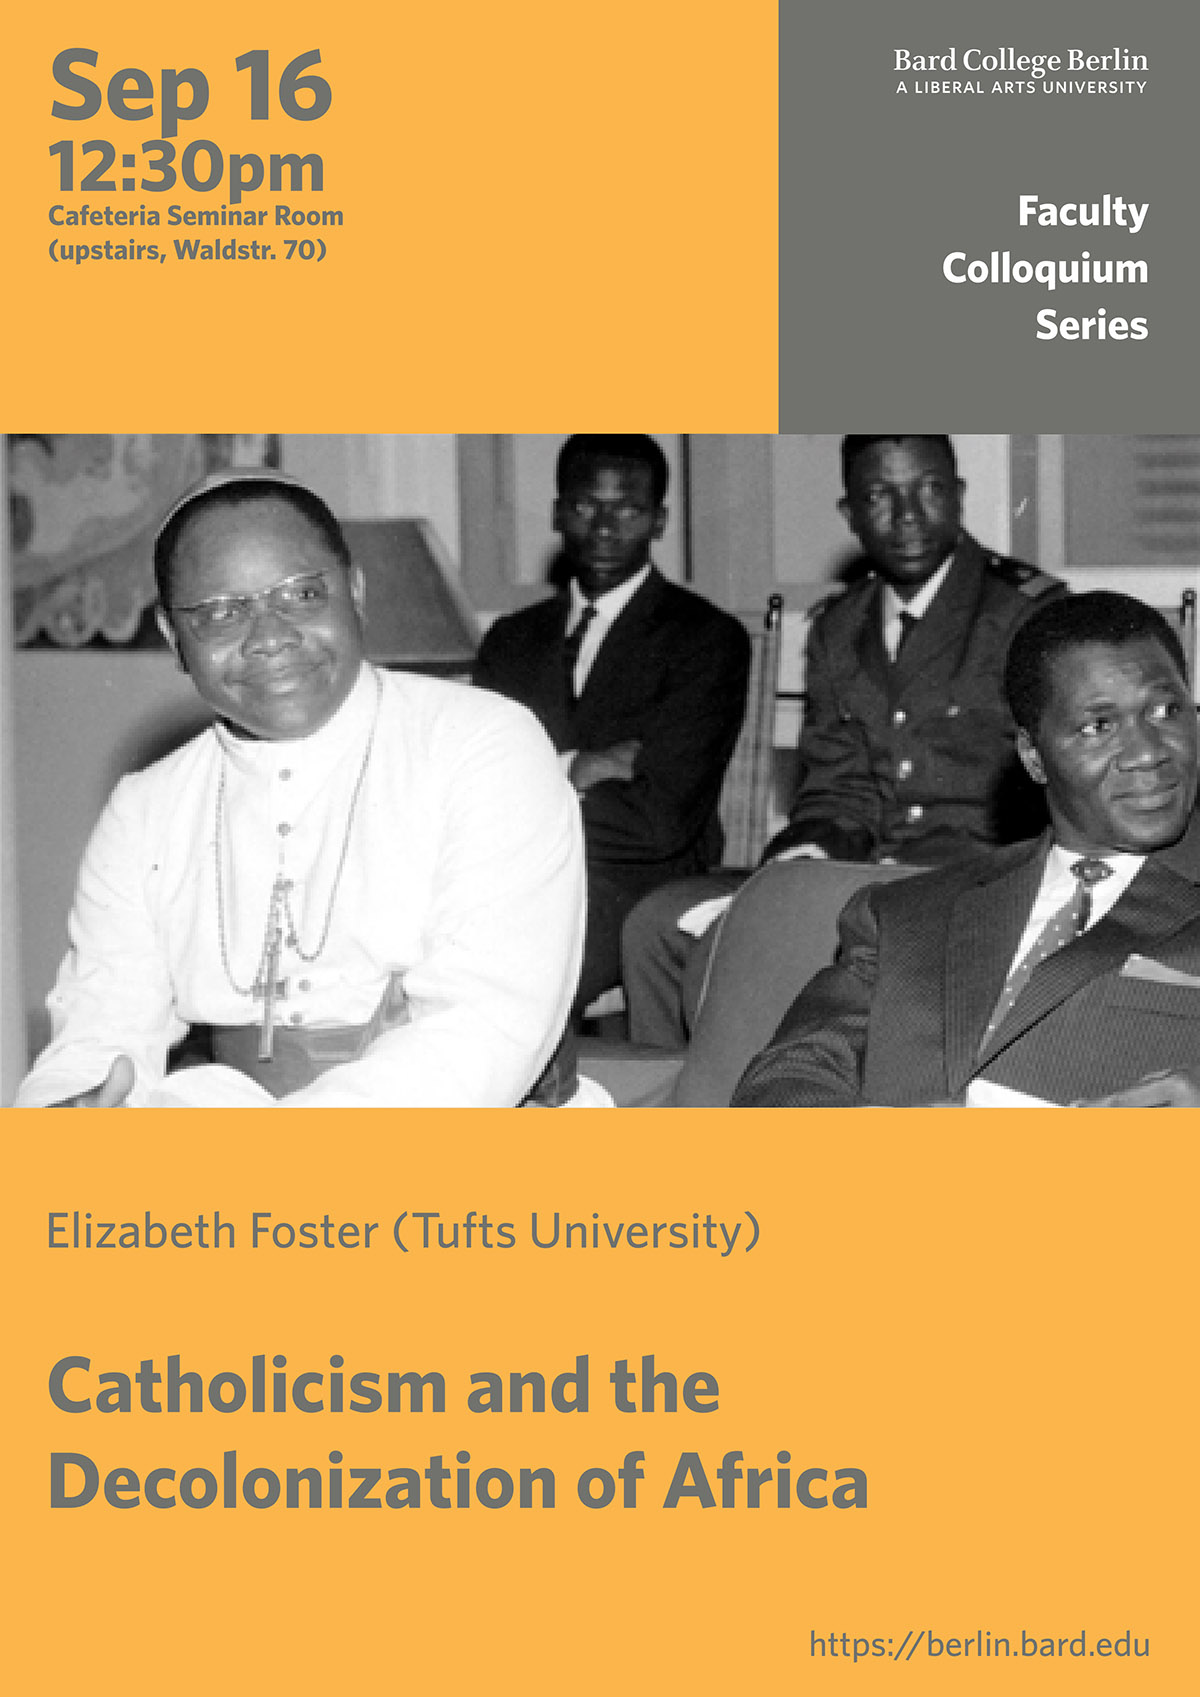 Faculty Colloquium: &quot;Catholicism and the Decolonization of Africa&quot;